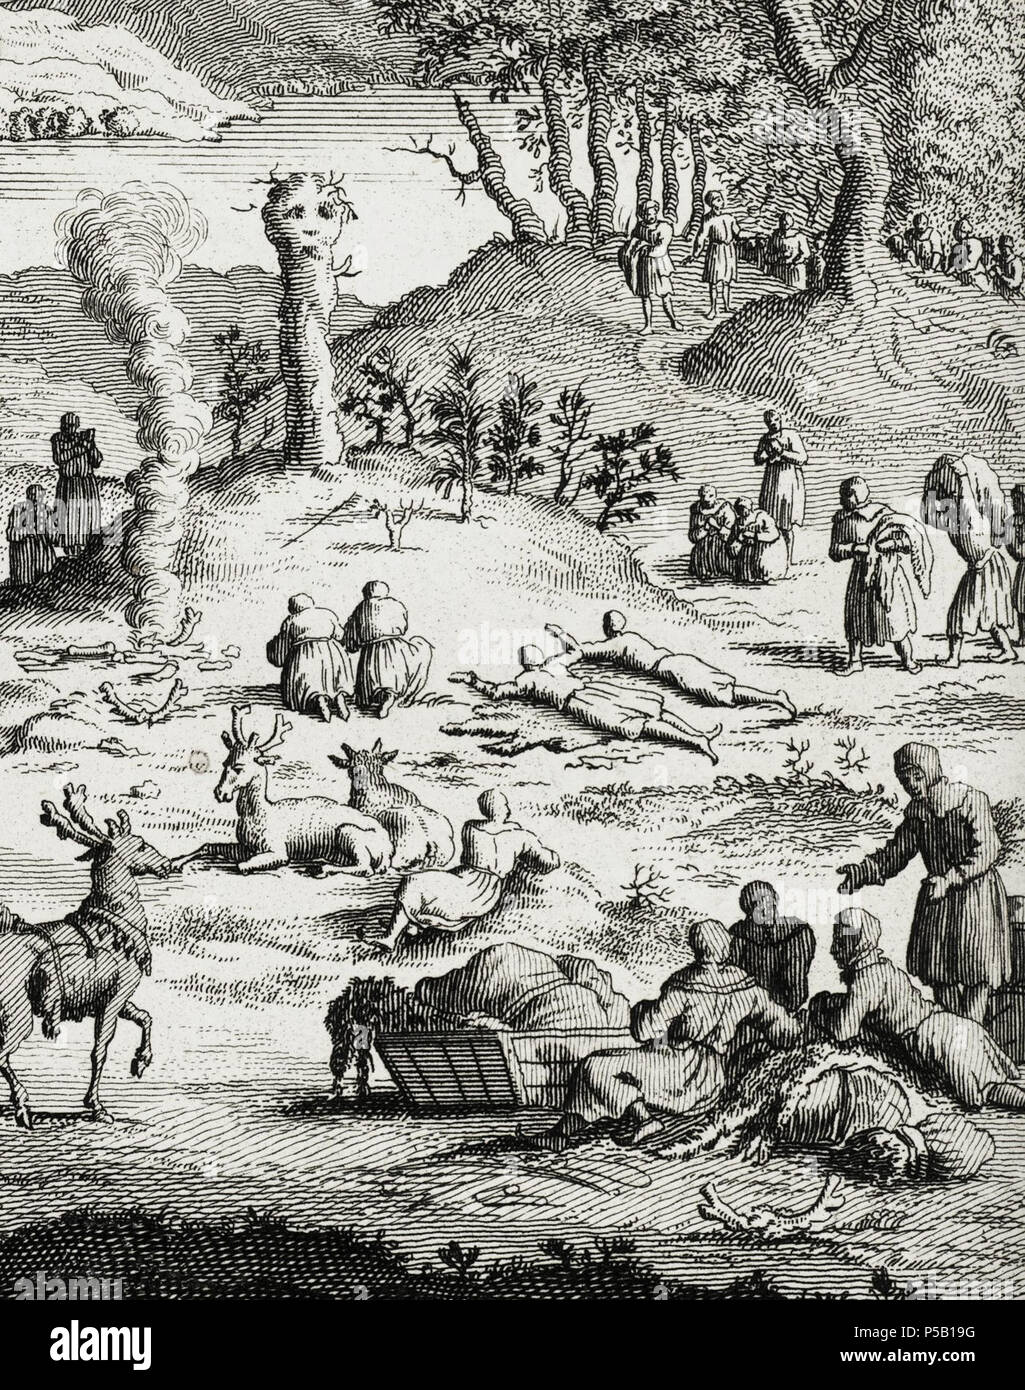 N/A. English: Sami People of the Nordic areas (Norway, Sweden and Finland) is offering and praying at a mound grave or tumuli. They are praying to the God of the Underworld. They offered horse’s and deer’s for the God worshipped at this sacred place. Bernard Picart used some of the same depictions of the ancient Sami religion as Johannes Scheffer or Johannes Schefferus had used for documenting the Laplander (i.e. Sami) people in the history book 'Lapponia' (1673). http://www.saamiblog.blogspot.com/ . 1724.   Bernard Picart  (1673–1733)     Alternative names Bernard Picard; Bernard Picart (le R Stock Photo